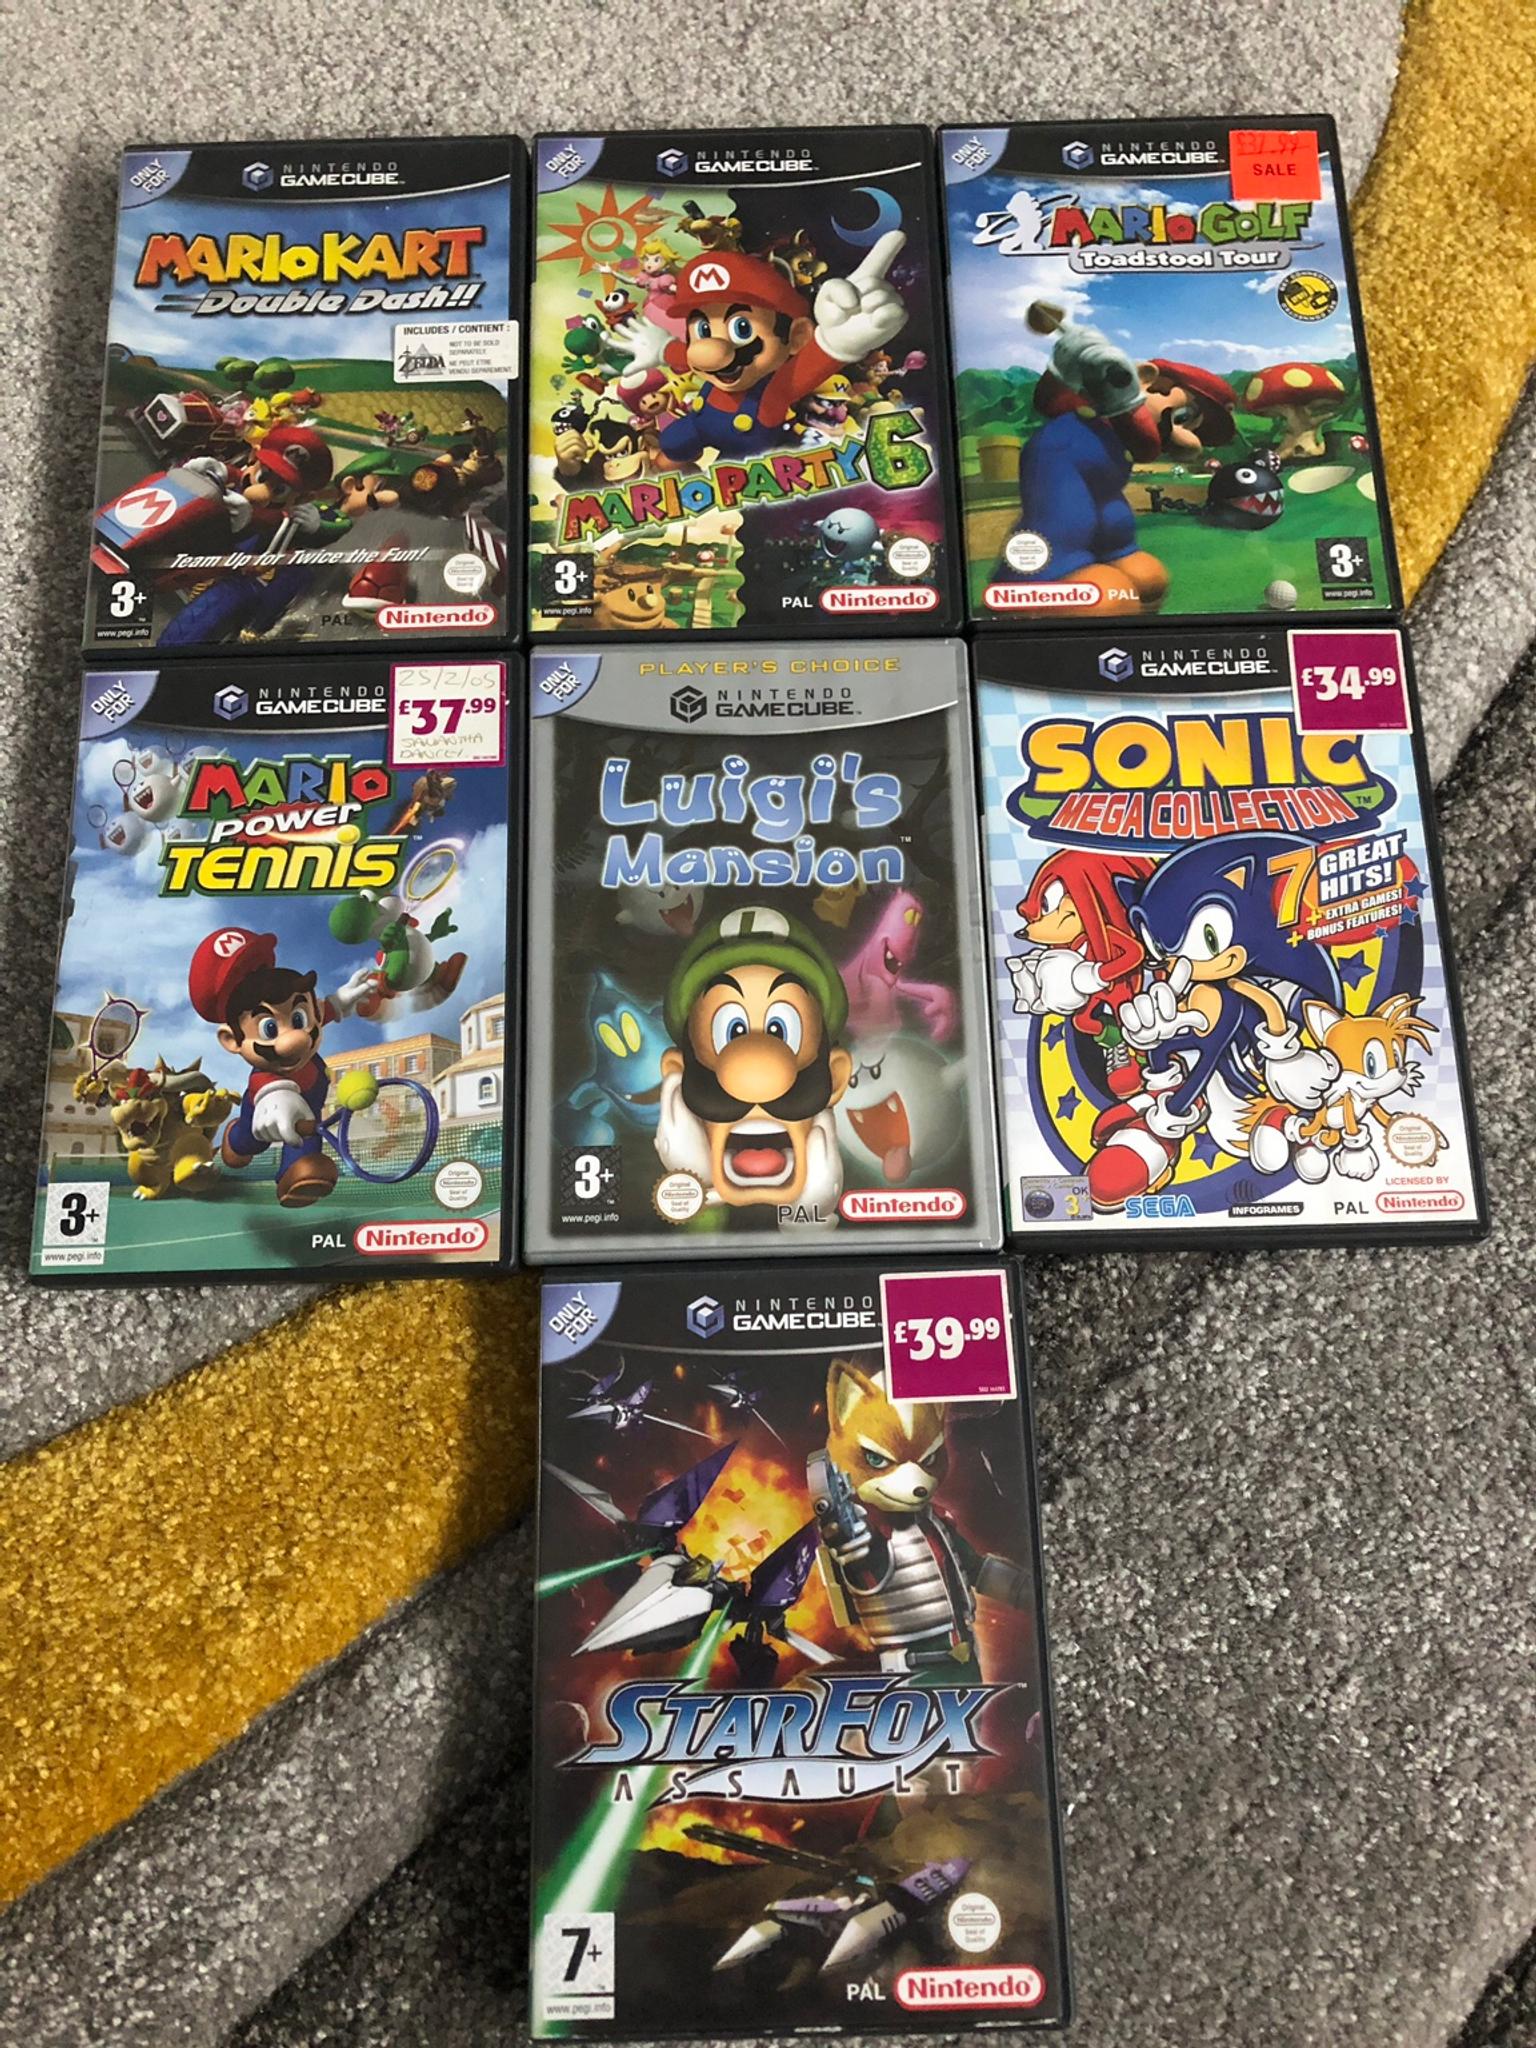 all sonic gamecube games